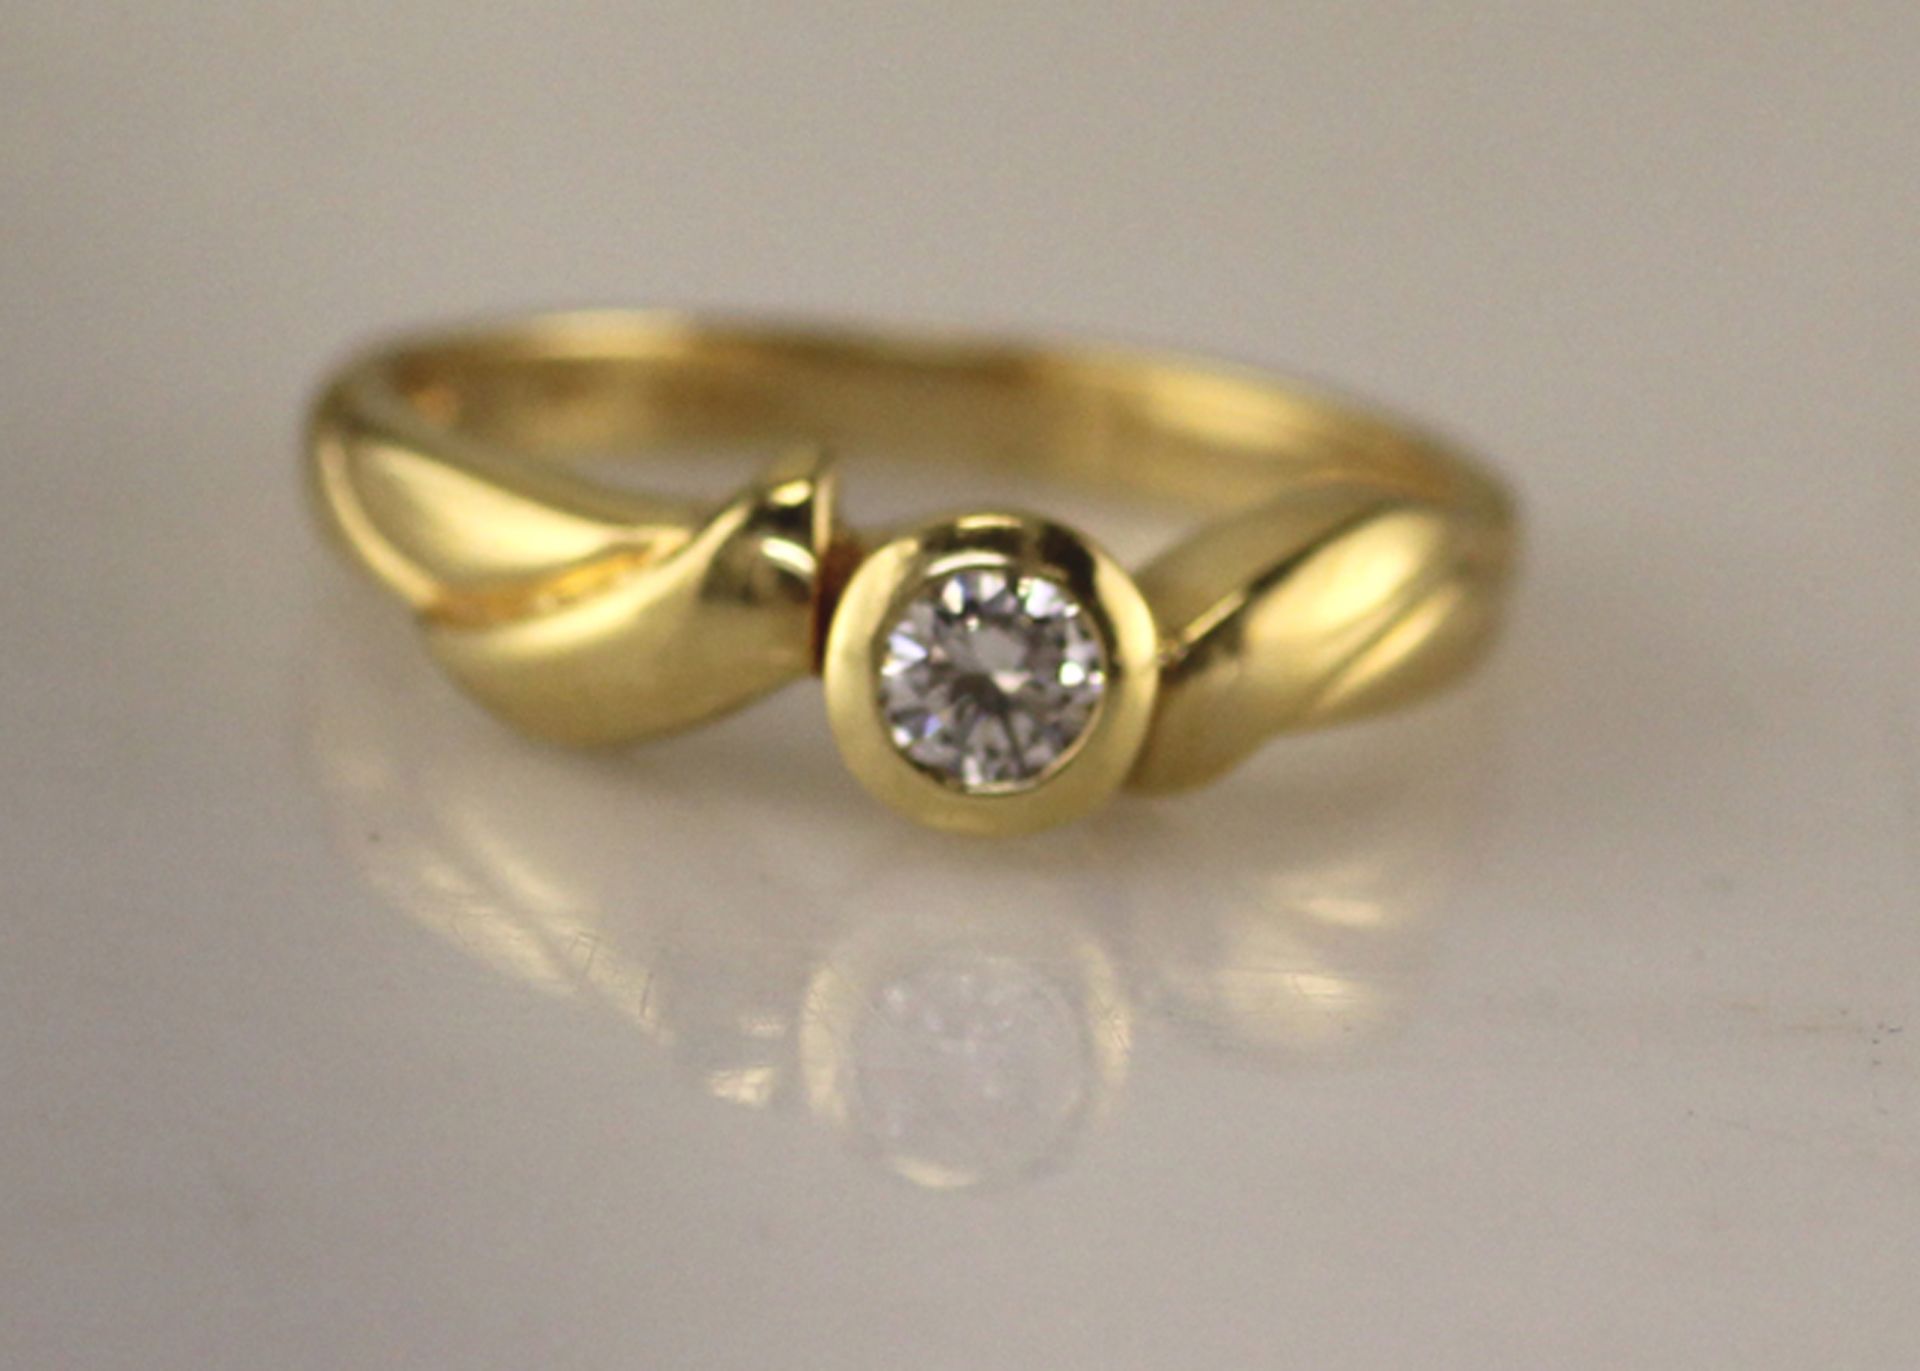 Valued by GIE £6,550.00 - 18ct Single Stone Fancy Rub Over Set Diamond Ring D SI 0.17 Carats - - Image 7 of 8